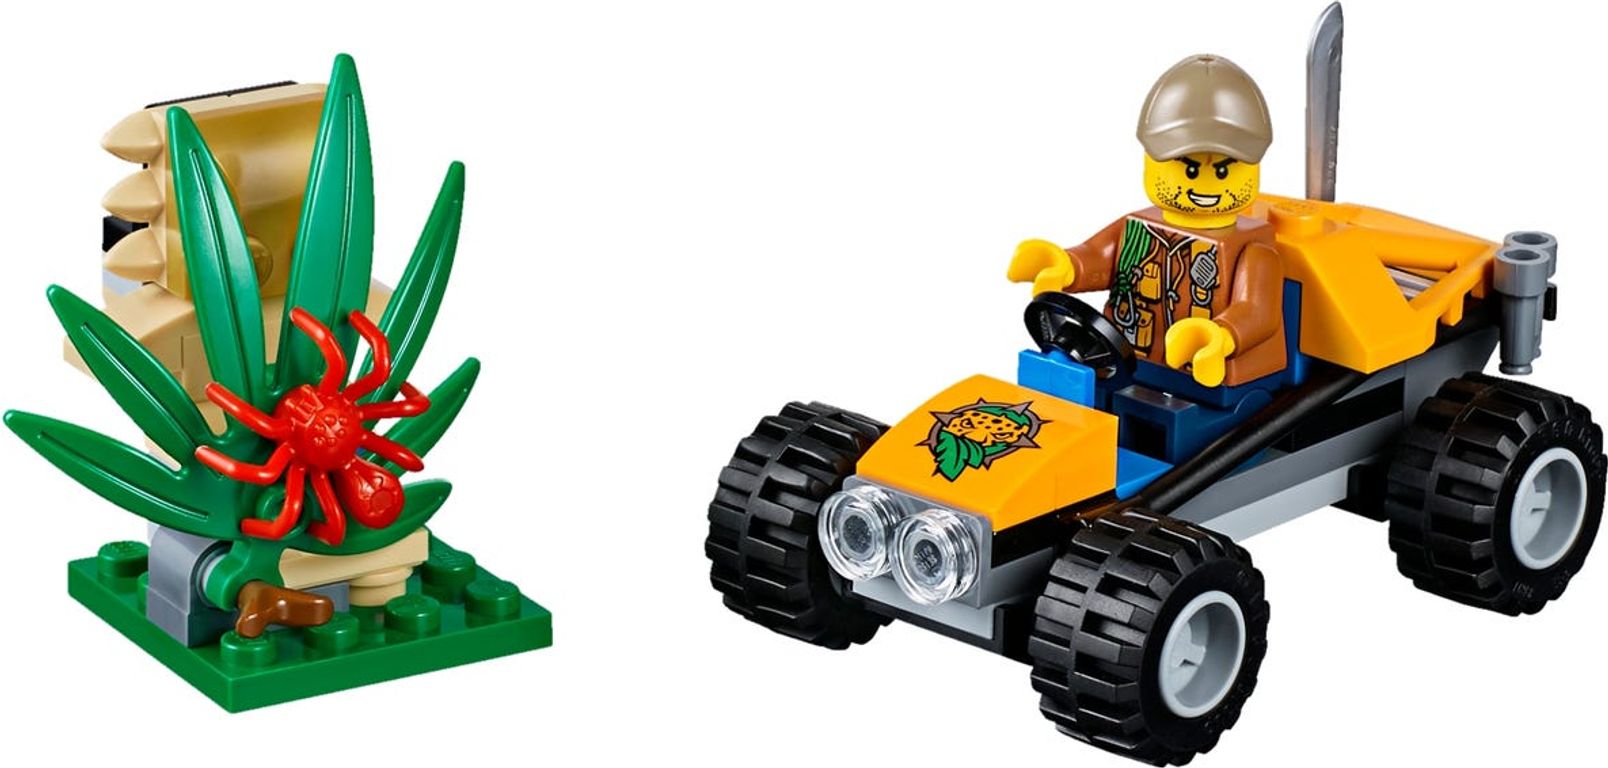 LEGO® City Jungle Buggy components